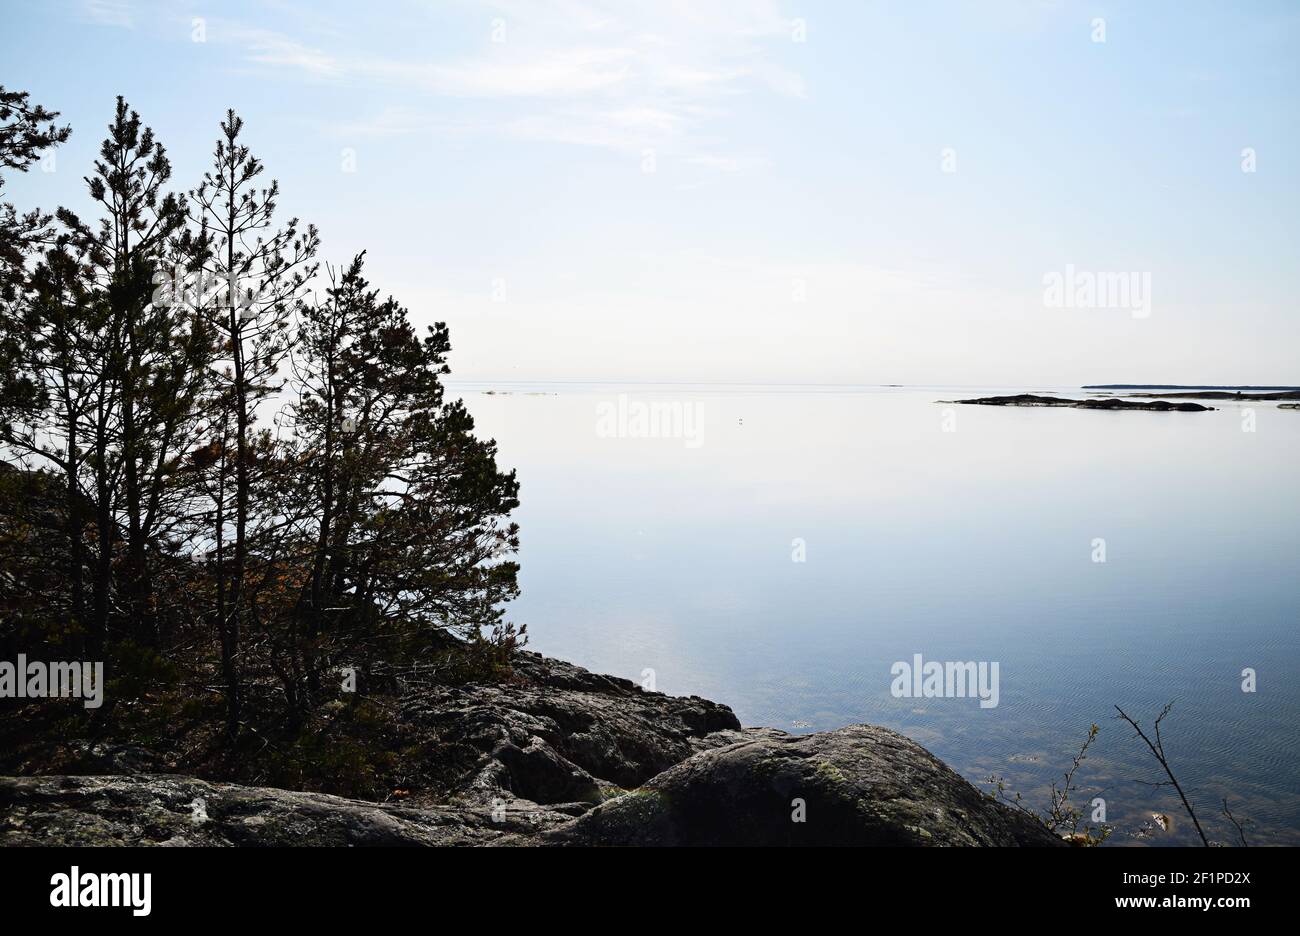 Beautiful day outdoors in the Swedish archipelago. Trees on the rock and calm water at sea. No people around this sunny day in Sweden. Stock Photo